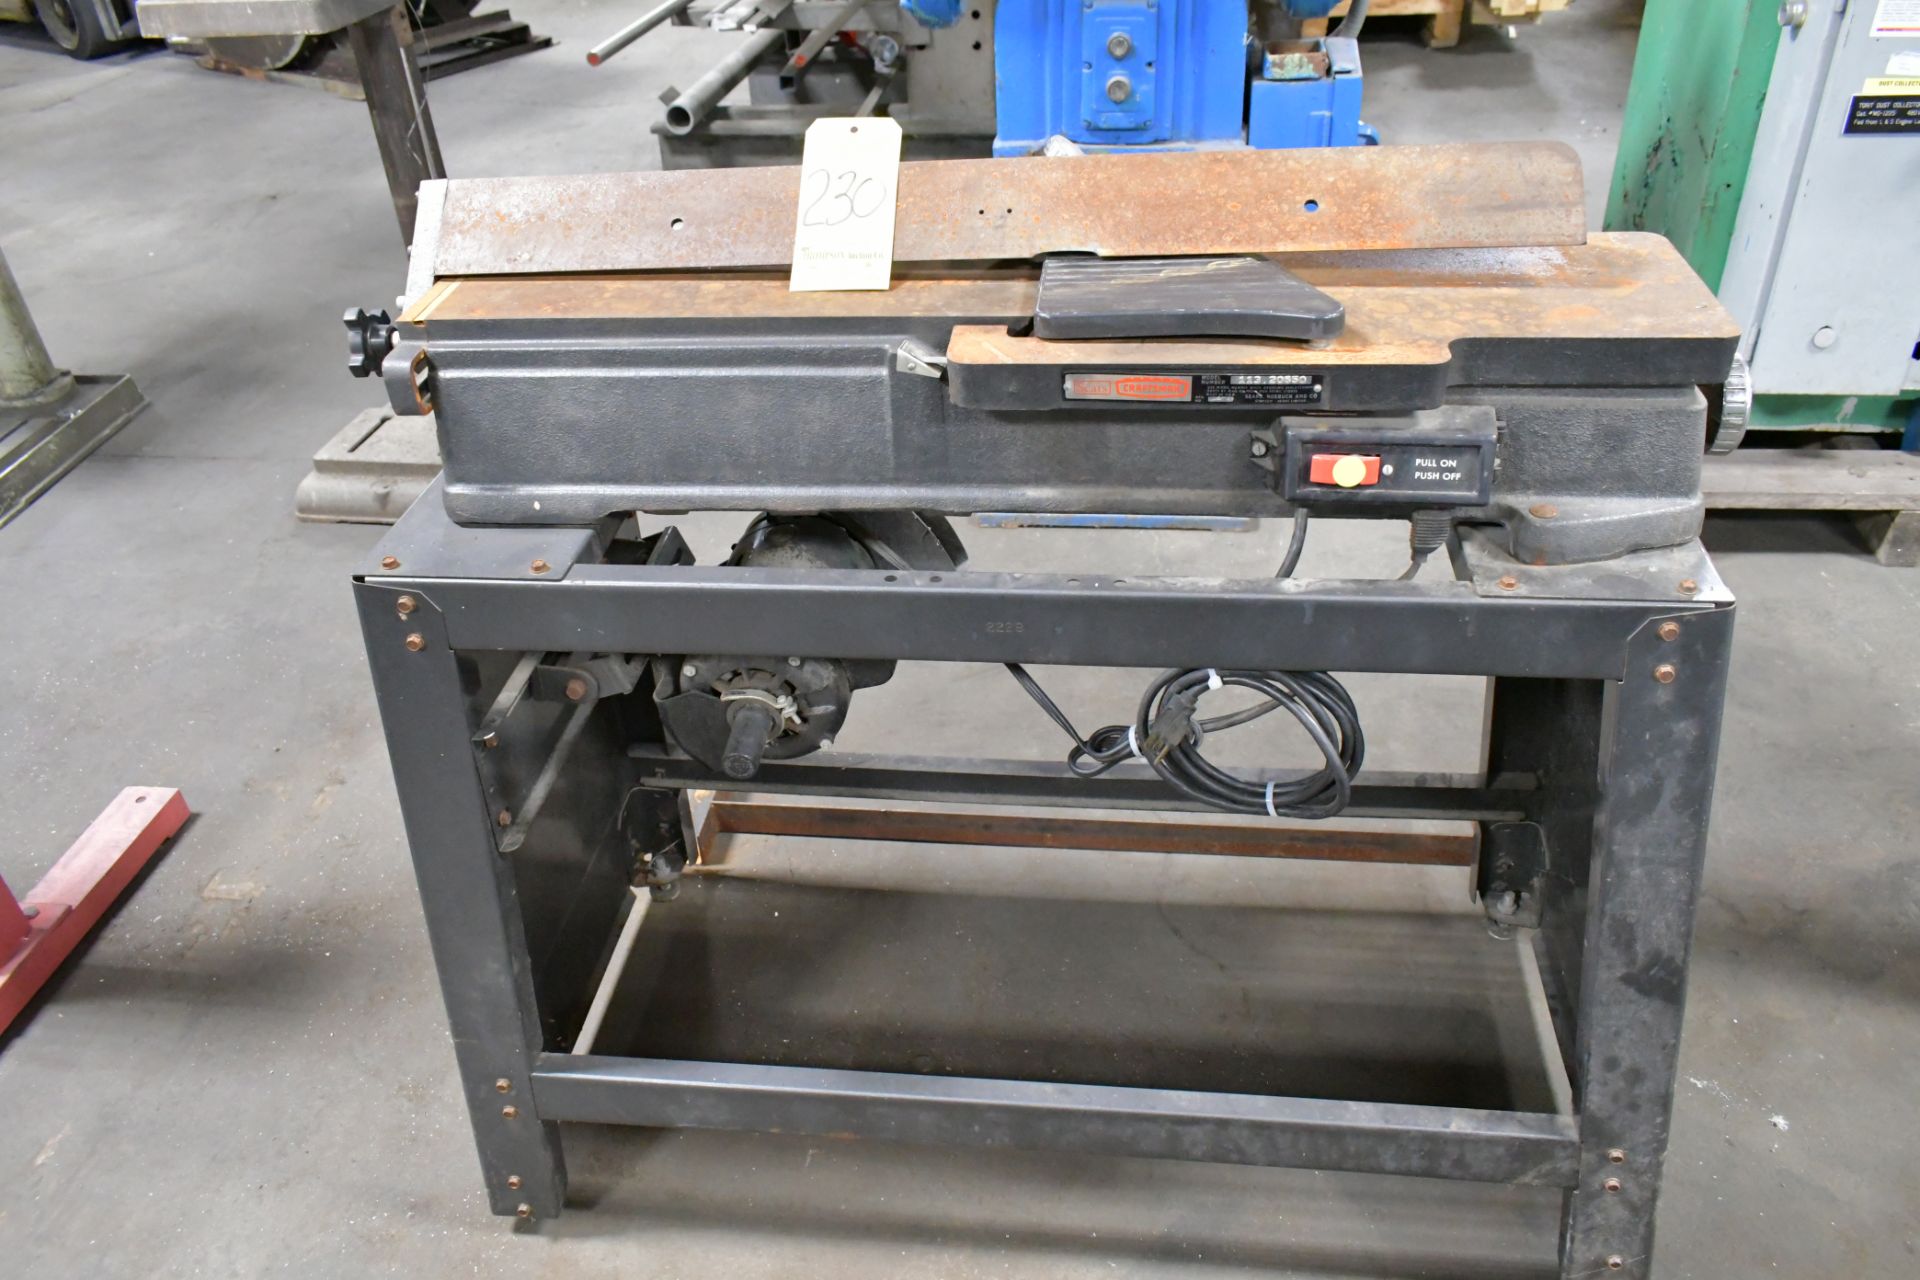 Sears Craftsman Model 113.20650 Jointer, Single Phase